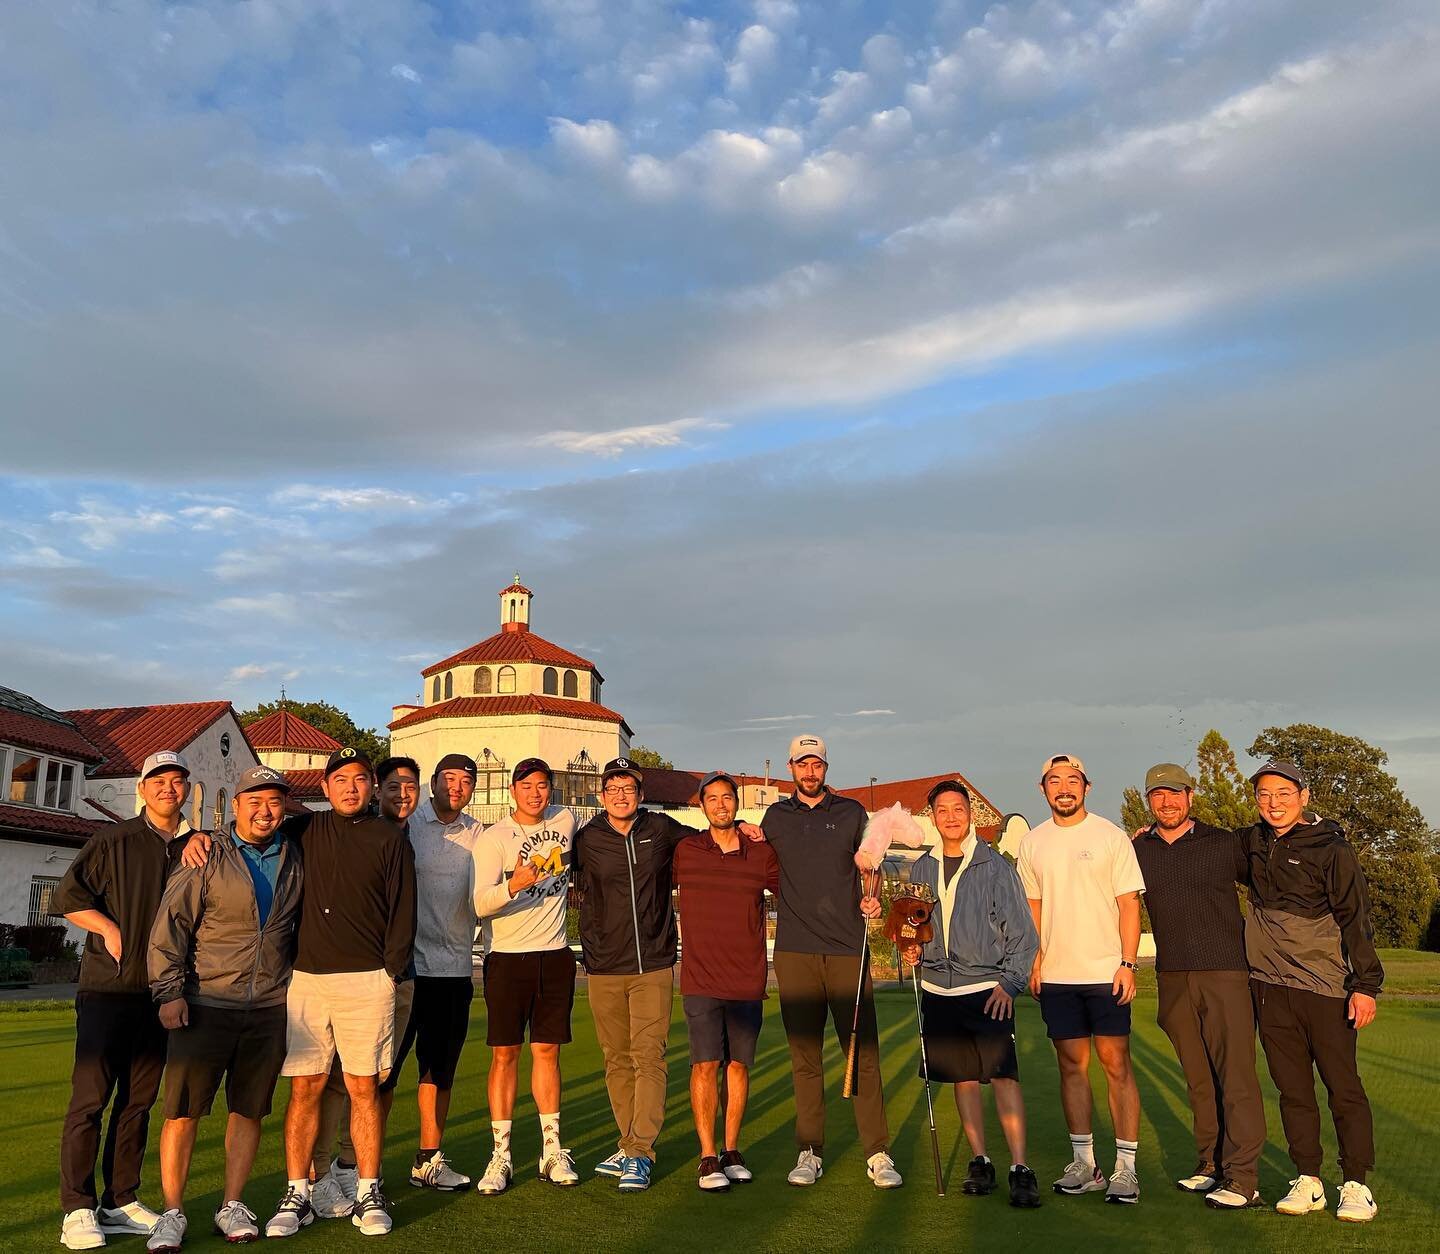 To cap off our action packed weekend, we had our Golf Outing! (Hopefully the first of many more to come in the future.)